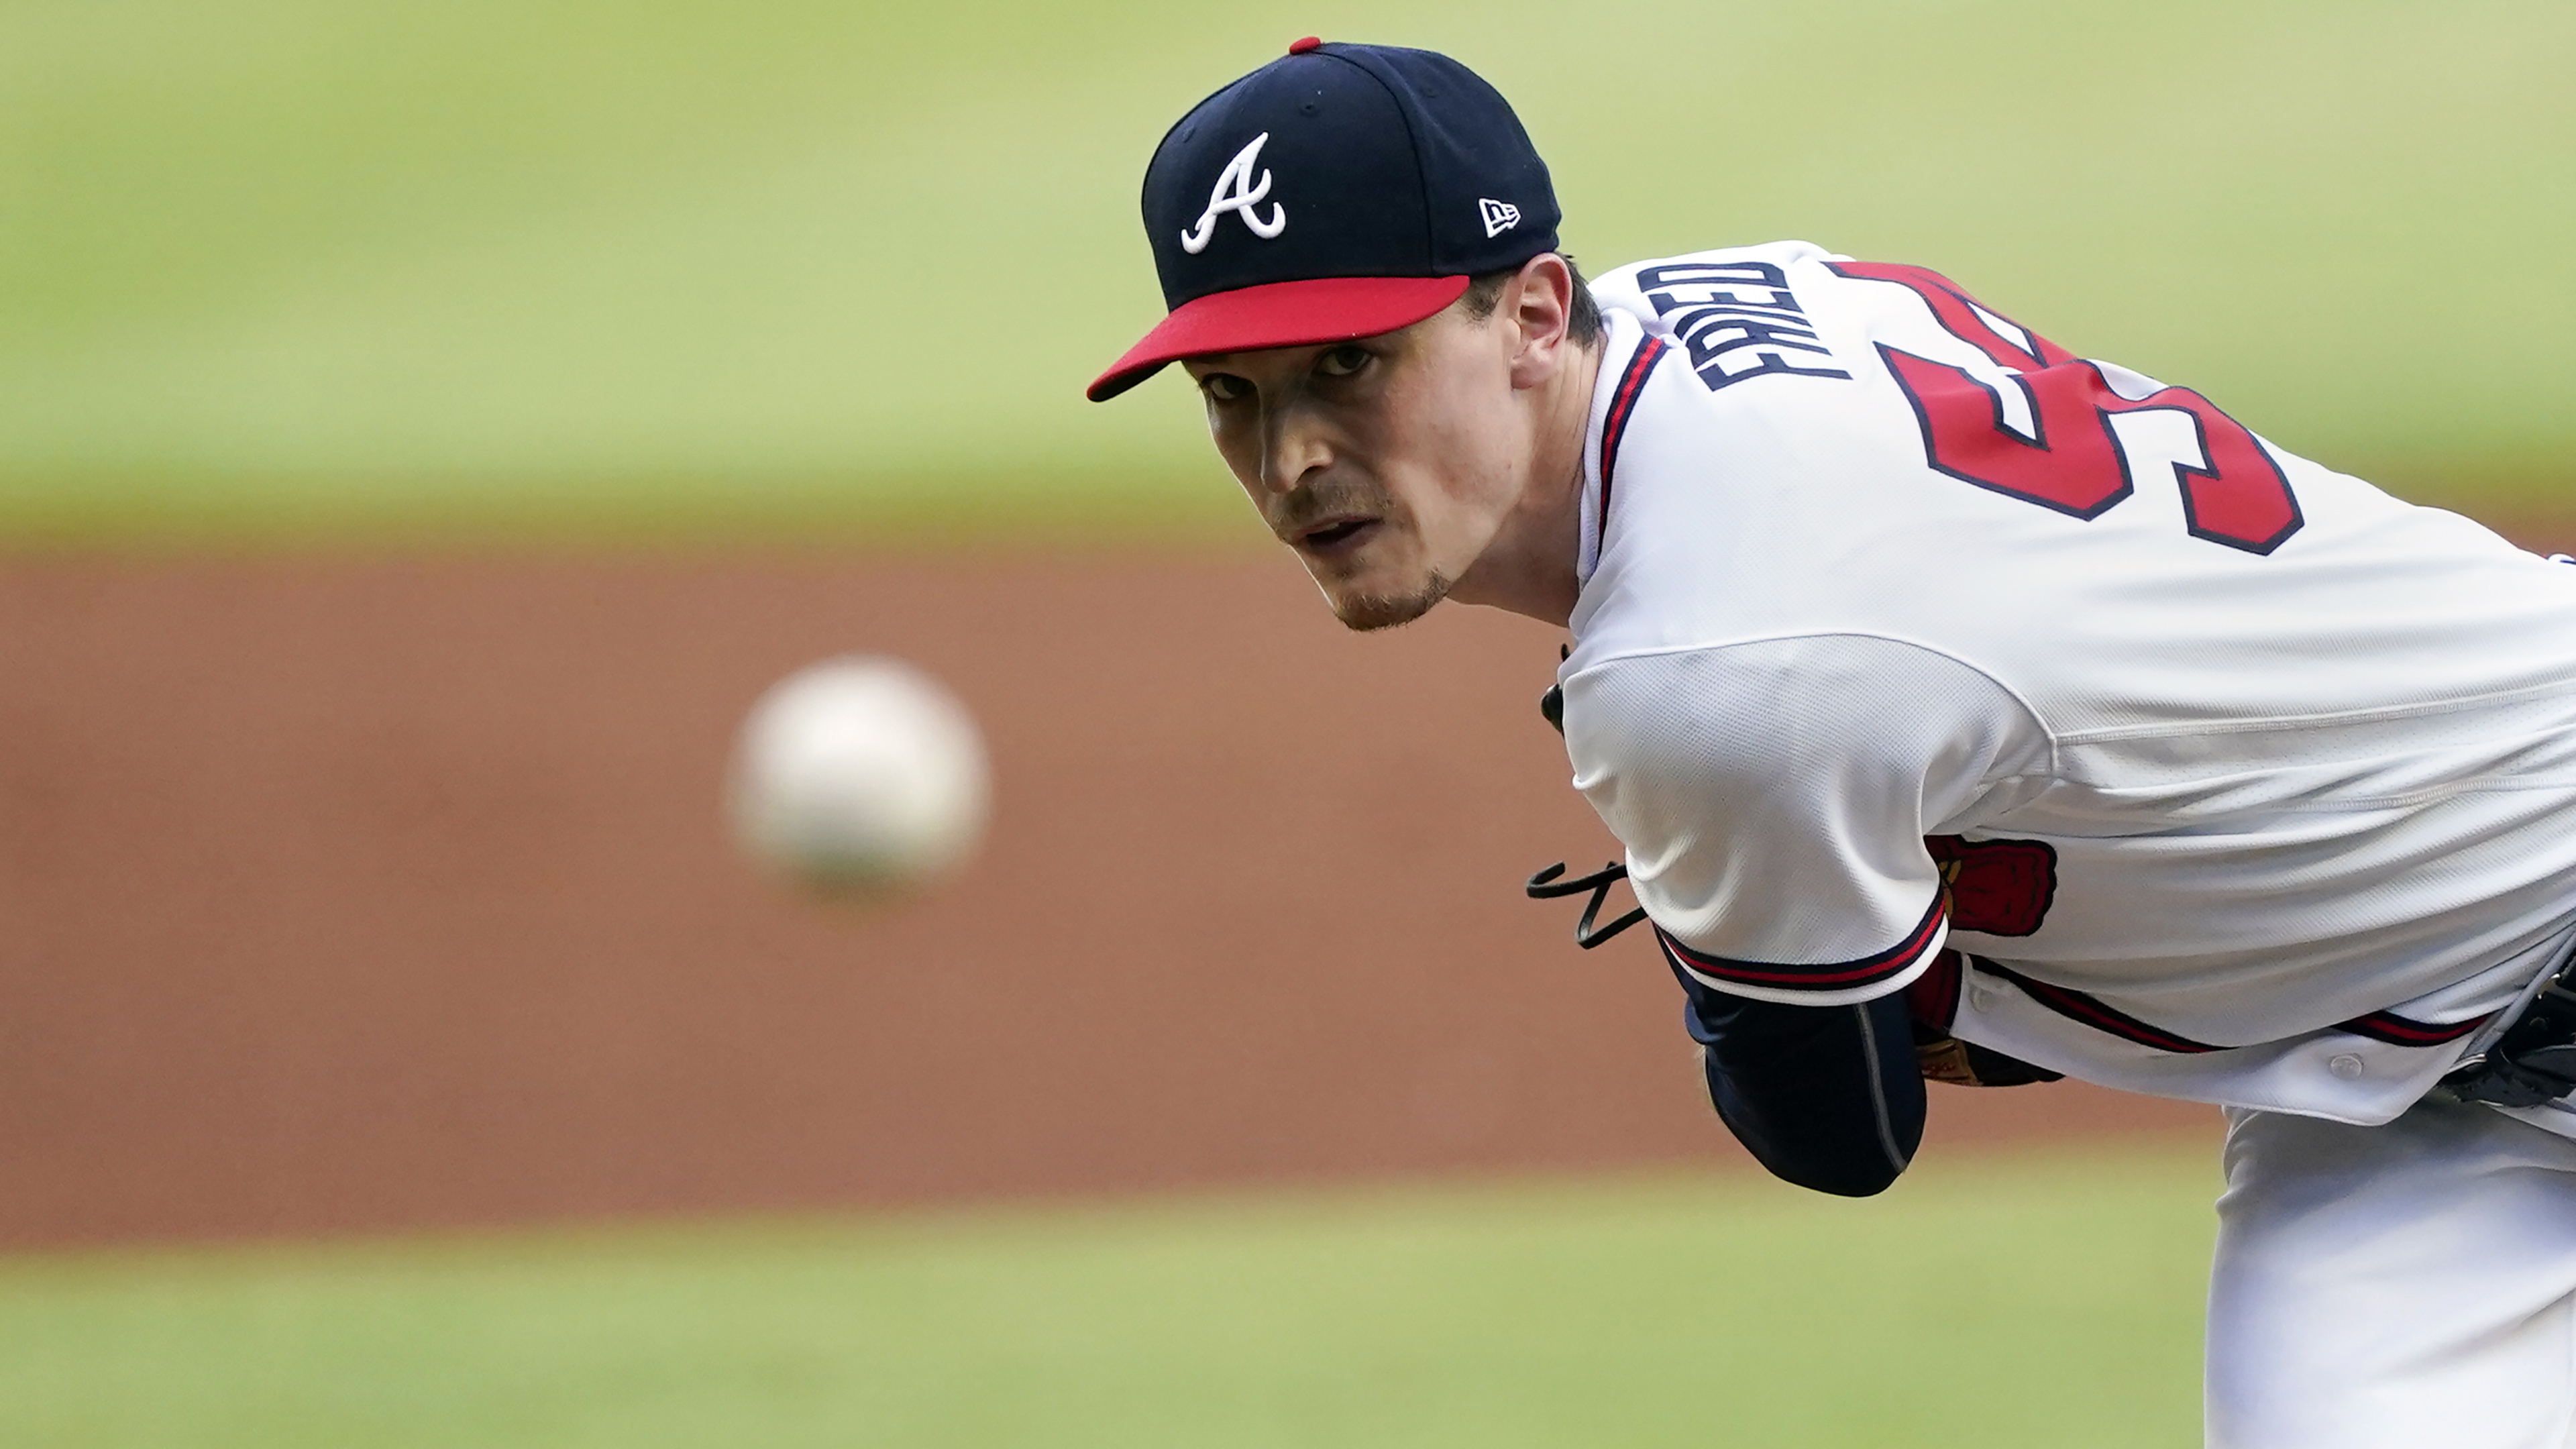 Bally Sports: Braves on X: Max Fried: I'm happy where I'm at right now.   I feel ready to go. Watch out, @MLB.  / X